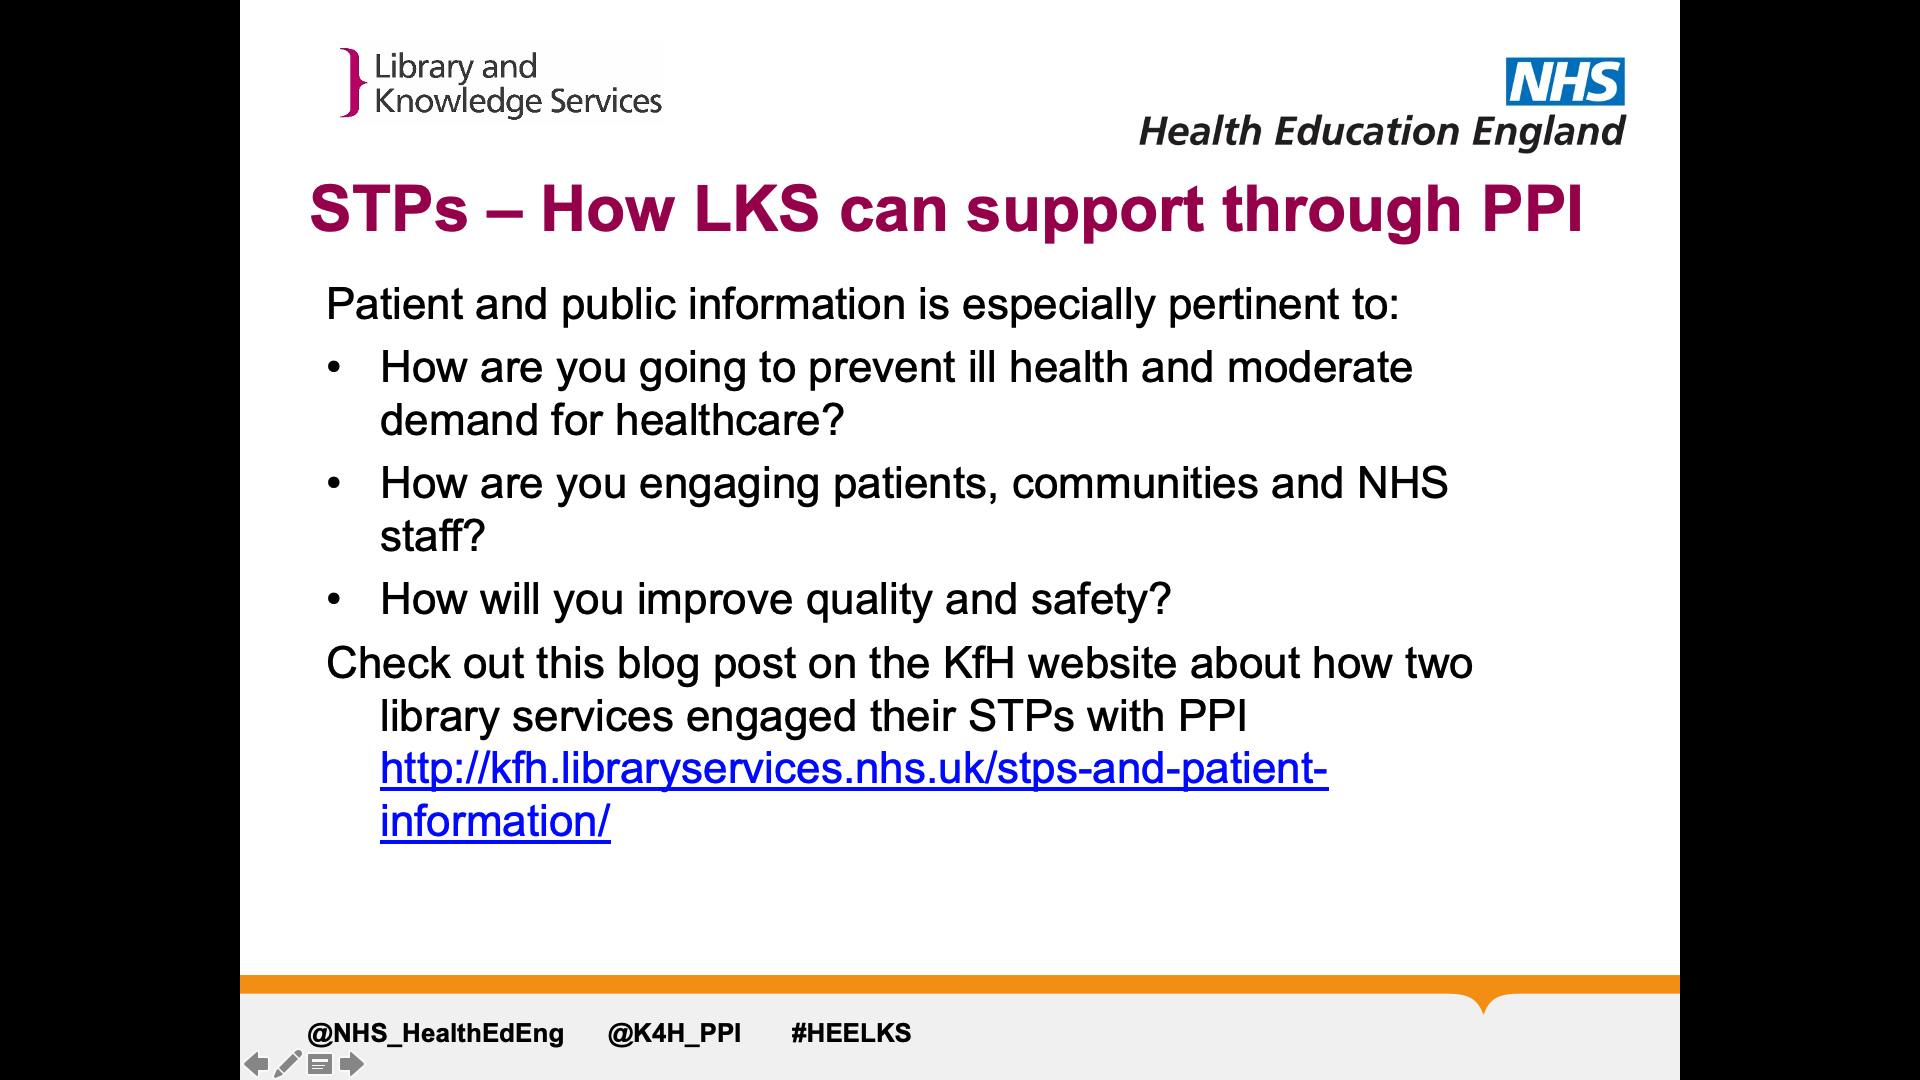 Title: STPs – How LKS can support through PPI. Text on page: Patient and public information is especially pertinent to: How are you going to prevent ill health and moderate demand for healthcare? How are you engaging patients, communities and NHS staff?  How will you improve quality and safety?  Check out this blog post on the KfH website about how two library services engaged their STPs with PPI http://kfh.libraryservices.nhs.uk/stps-and-patient-information/